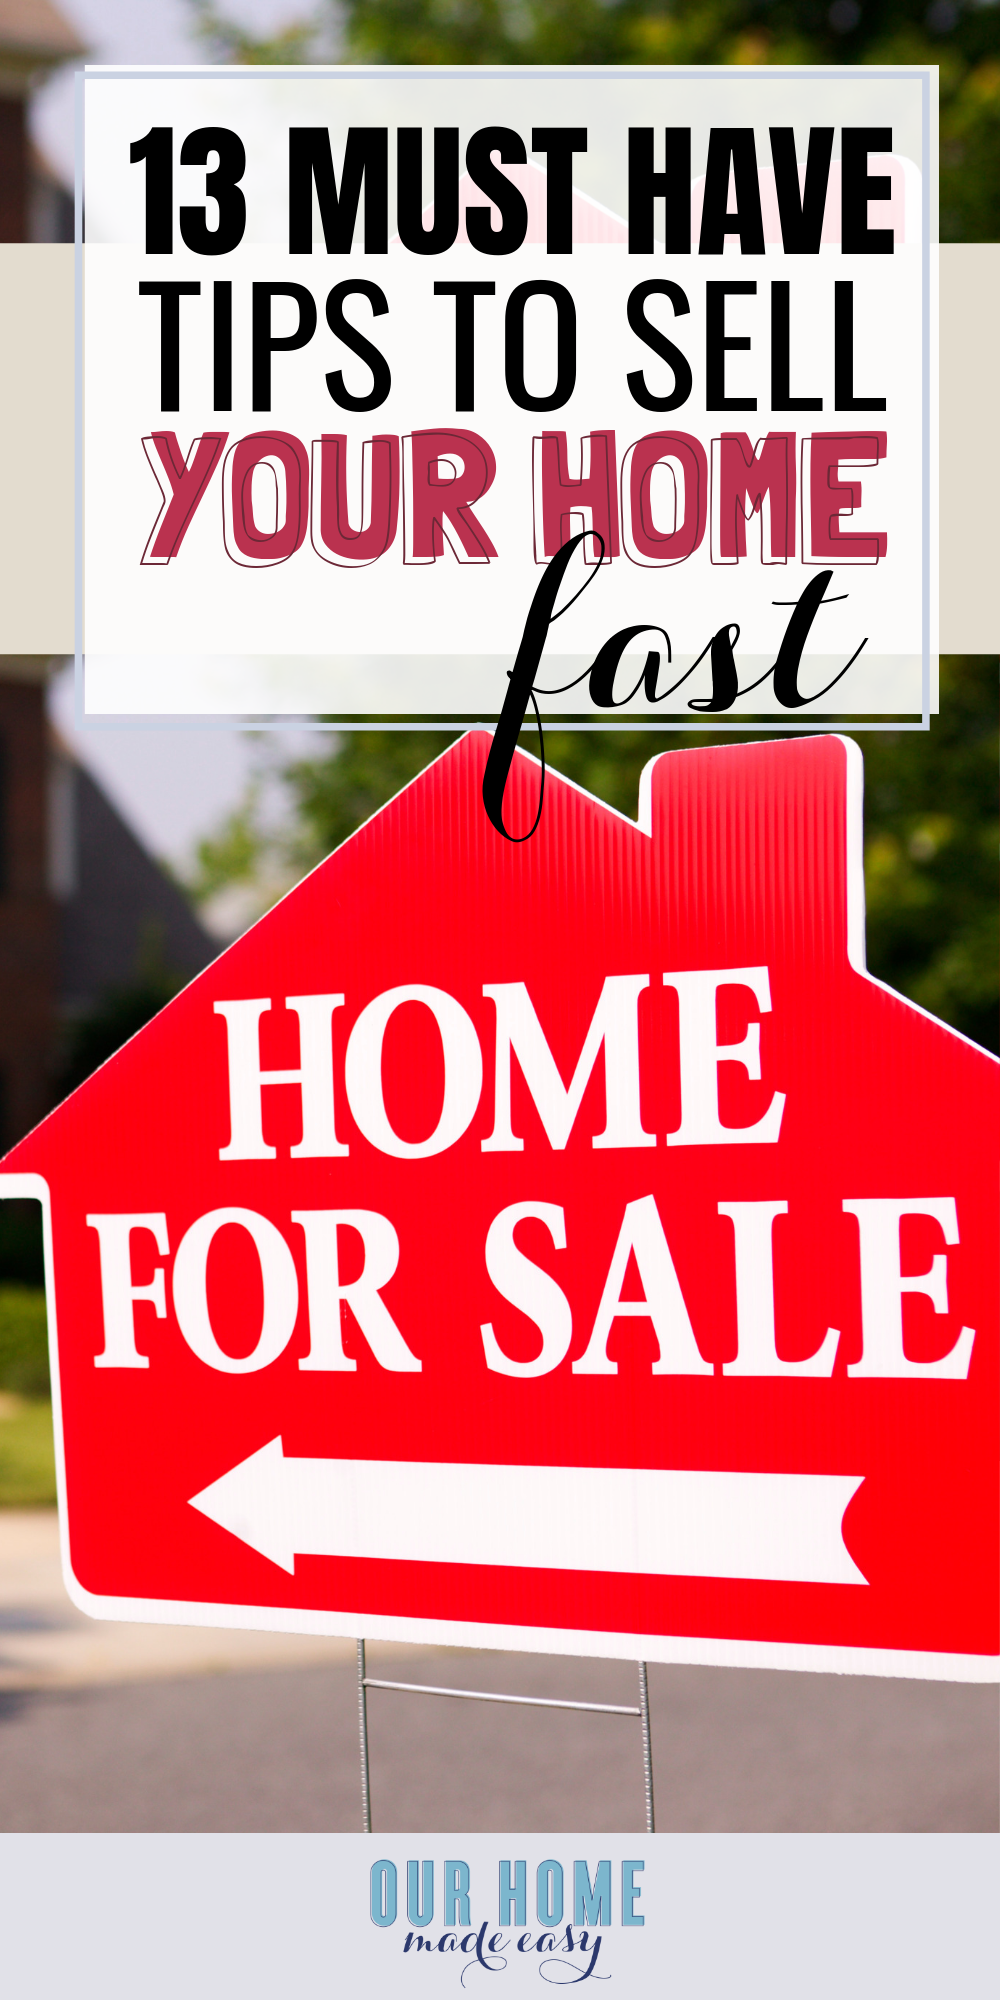 These pro tips will help you prepare your home for sale fast